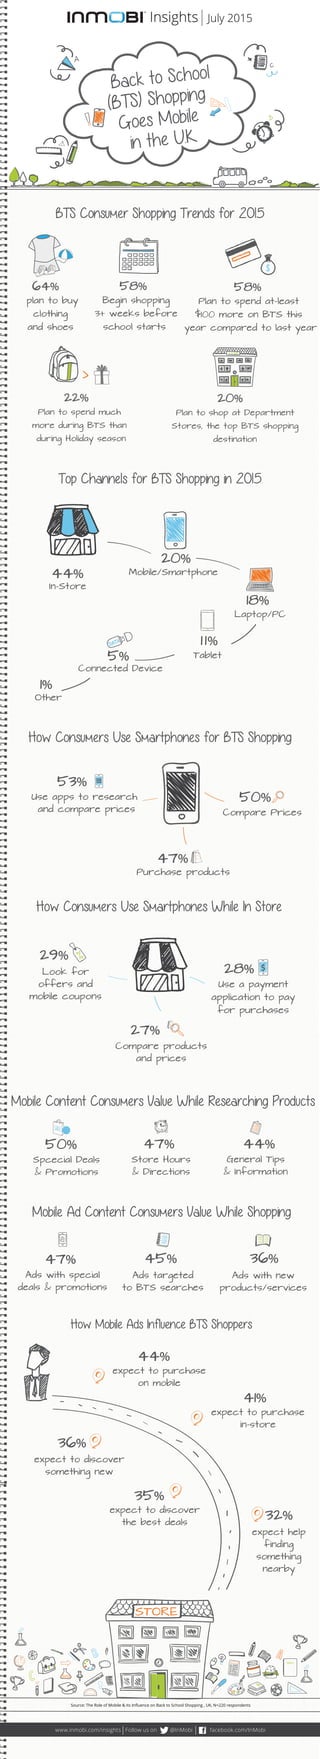 BTS Consumer Shopping Trends for 2015
Top Channels for BTS Shopping in 2015
How Consumers Use Smartphones for BTS Shopping
Back to School
(BTS) Shopping
Goes Mobile
in the U.K
STORE
$
22%�
Plan to spend much
more during BTS than
during Holiday season
58%�
Plan to spend at-least
$100 more on BTS this
year compared to last year
58%�
Begin shopping
3+ weeks before
school starts
20%�
Plan to shop at Department
Stores, the top BTS shopping
destination
64%�
plan to buy
clothing
and shoes
How Mobile Ads Influence BTS Shoppers
expect to purchase
on mobile
expect to discover
something new
expect to purchase
in-store
expect help
finding
something
nearby
expect to discover
the best deals
44%�
41%�
36%�
35%�
32%�
Source: The Role of Mobile & its Inﬂuence on Back to School Shopping , UK, N=220 respondents
Laptop/PC
18%�
Mobile/Smartphone
20%�
Connected Device
5%�
In-Store
Other
1%�
44%�
Tablet
1 1%
Spcecial Deals
& Promotions
50%�
Store Hours
& Directions
47%�
General Tips
& Information
44%
Ads with special
deals & promotions
47%�
Ads targeted
to BTS searches
45%�
Ads with new
products/services
36%�
Insights July 2015
Mobile Content Consumers Value While Researching Products
Mobile Ad Content Consumers Value While Shopping
Use apps to research
and compare prices
53%
Compare Prices
Purchase products
47%�
How Consumers Use Smartphones While In Store
Compare products
and prices
27%�
Use a payment
application to pay
for purchases
28%�Look for
offers and
mobile coupons
29%�
www.inmobi.com/insights Follow us on @InMobi facebook.com/InMobi
50%
$
 